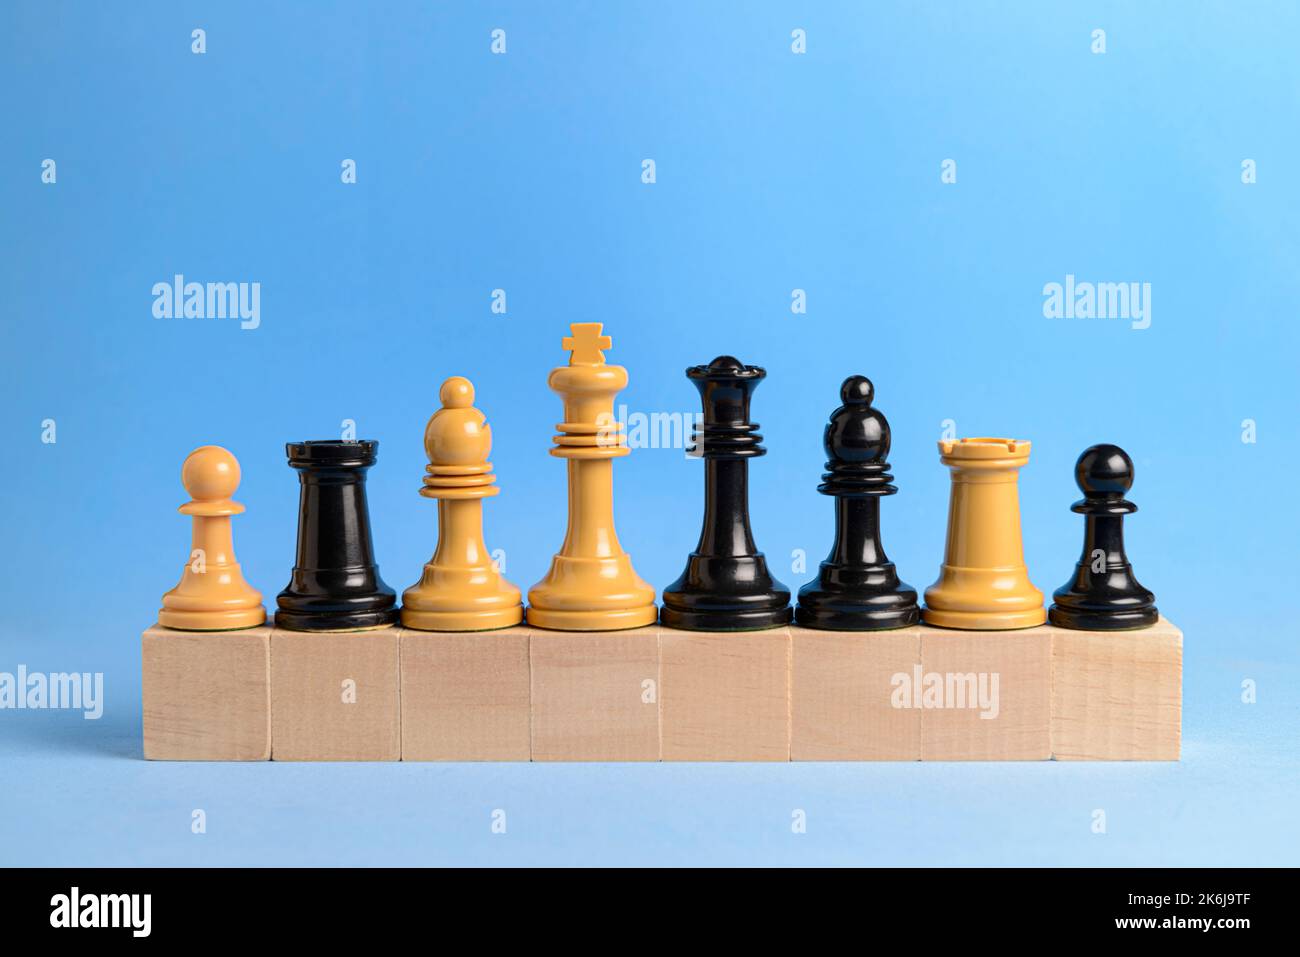 White and black chess pieces on wooden blocks with blue background. Concept of teamwork and cooperation. Stock Photo